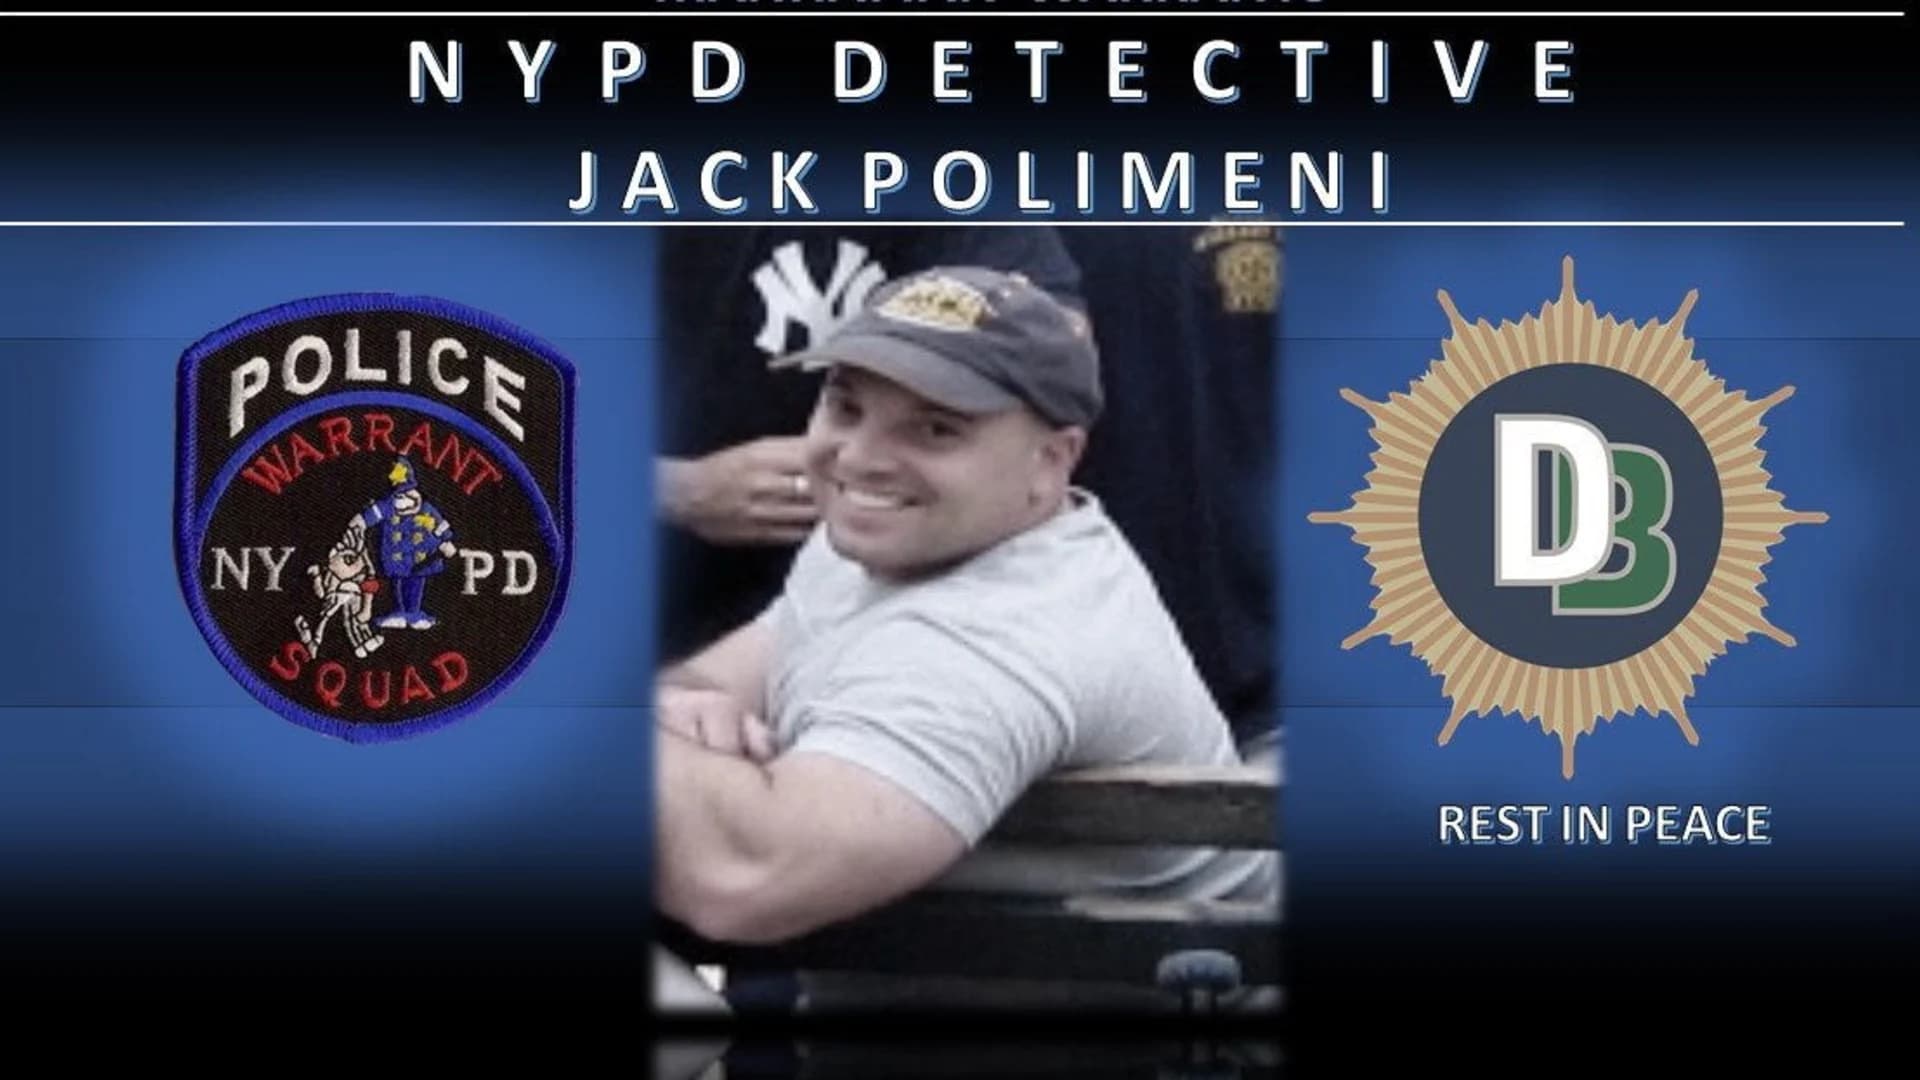 NYPD detective dies due to COVID-19 complications